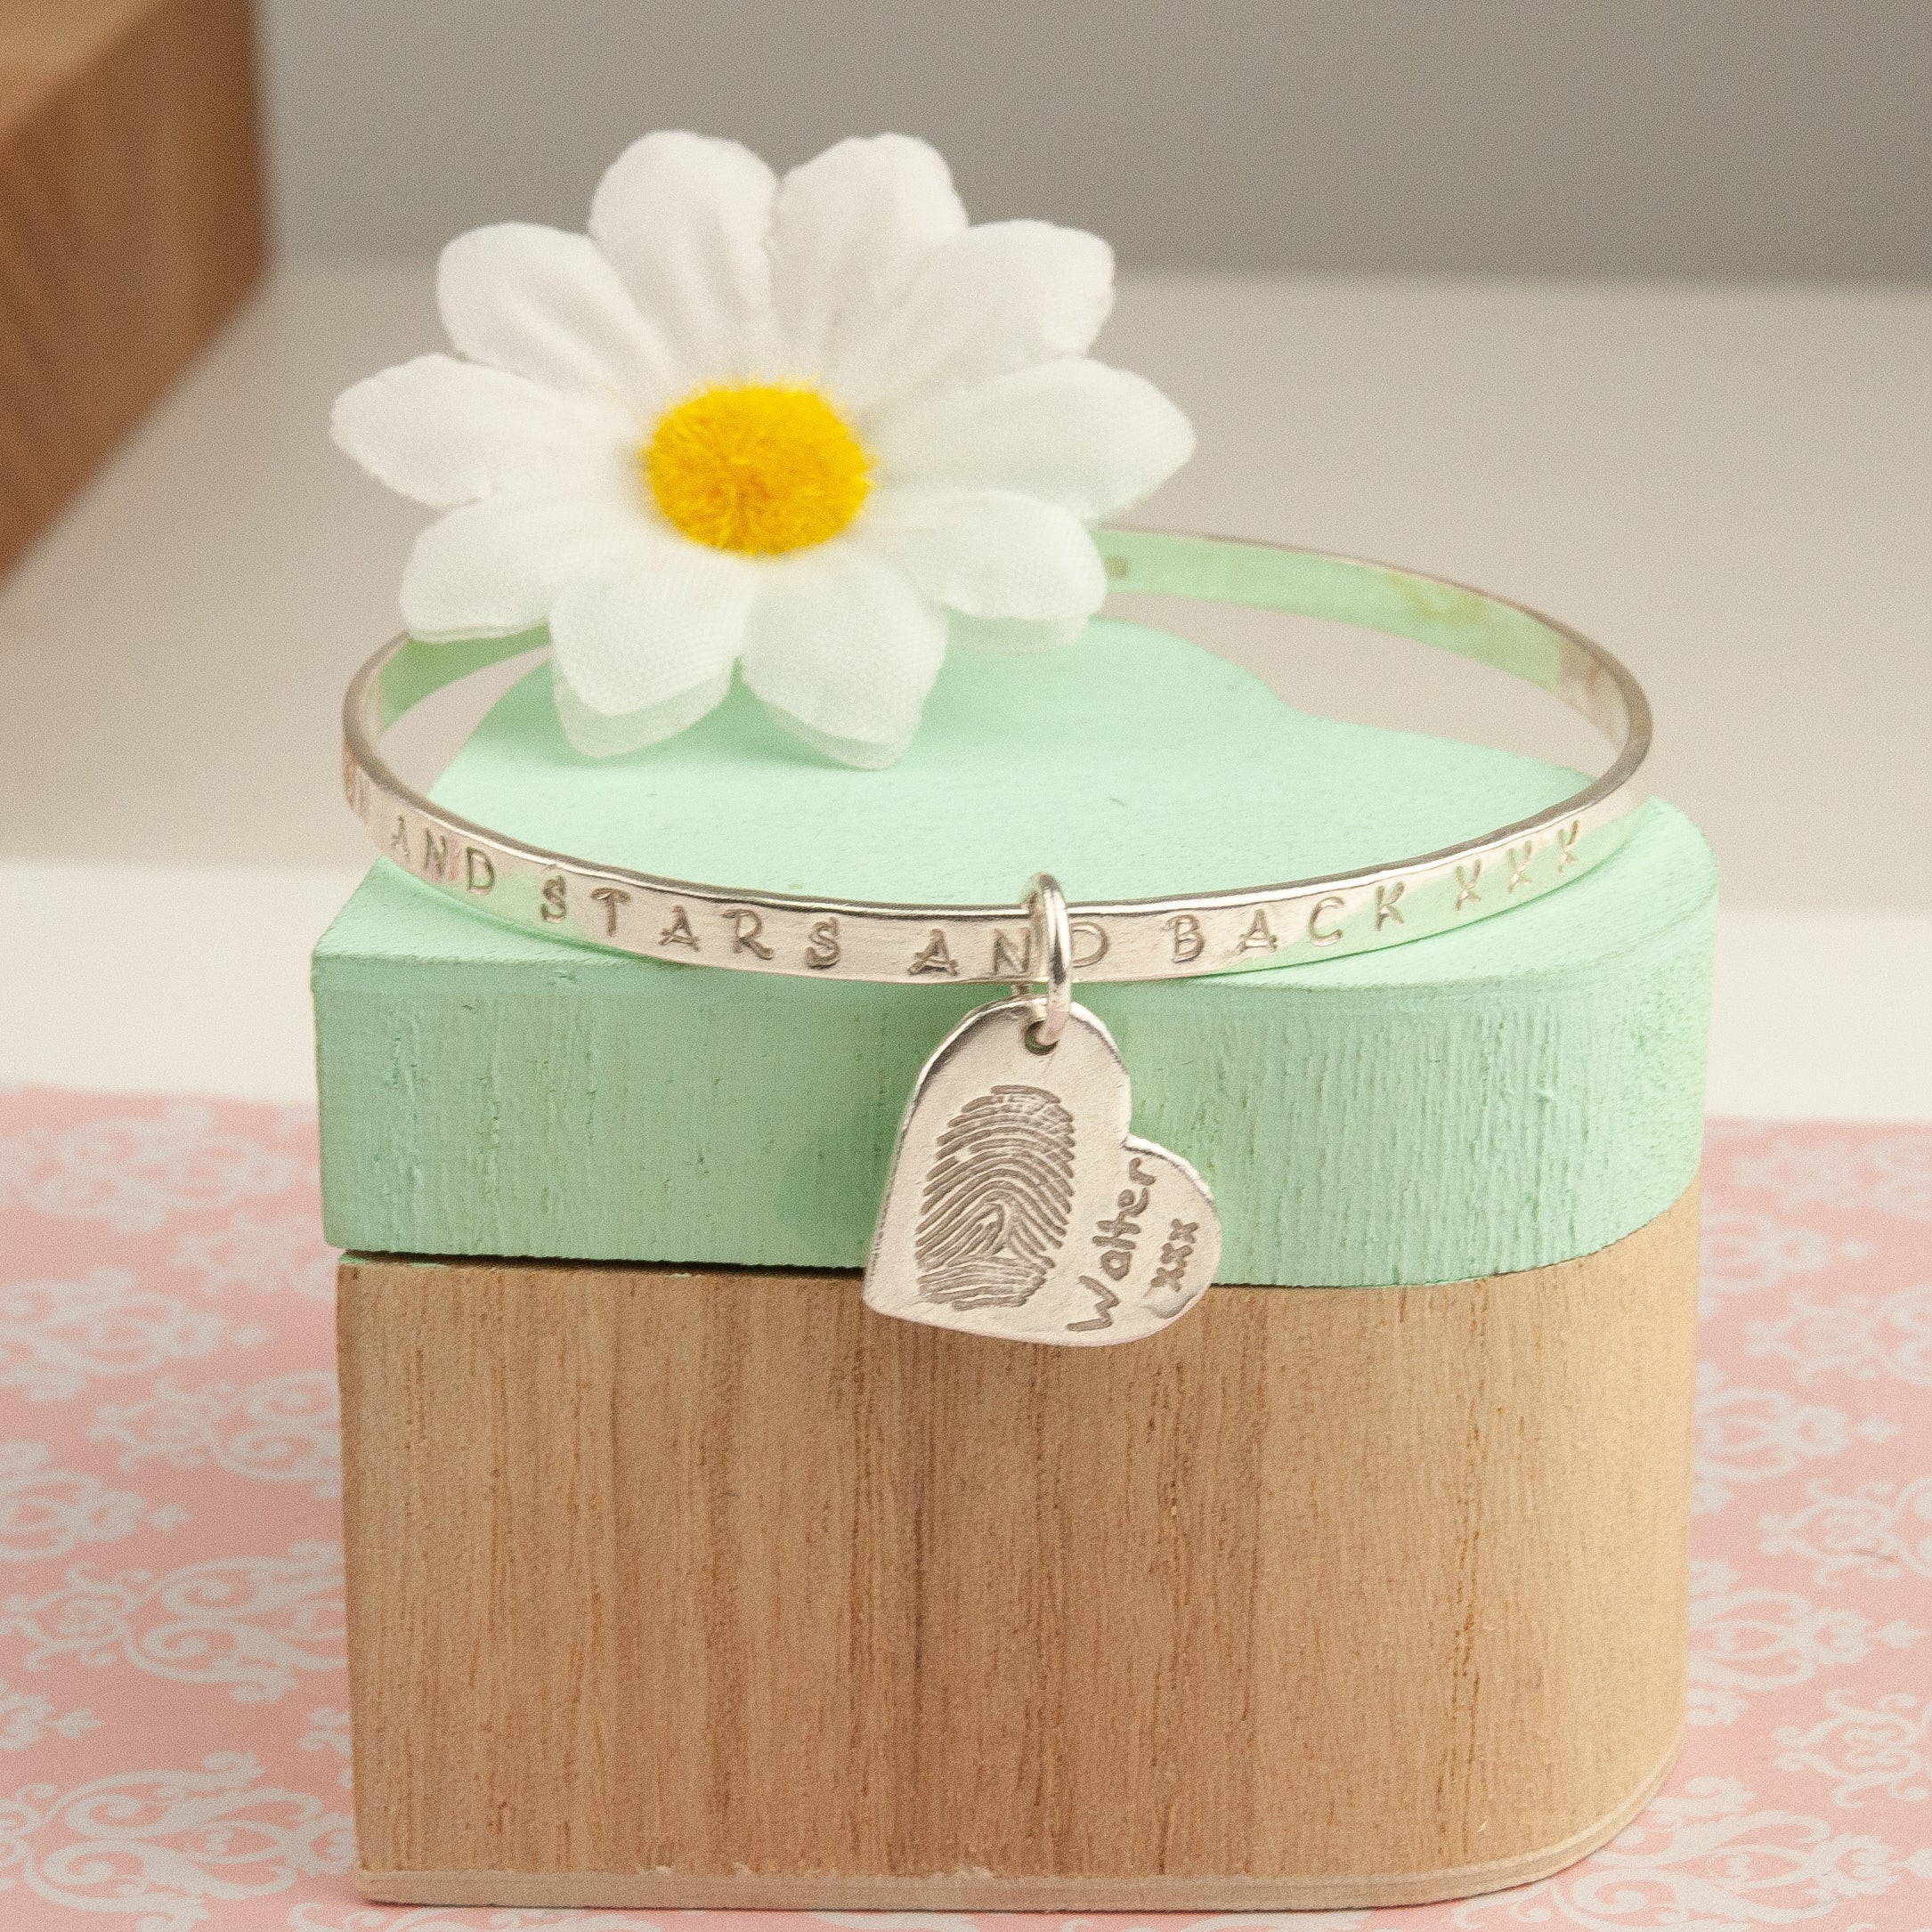 Belle & Bee sterling silver message bangle with fingerprint charm